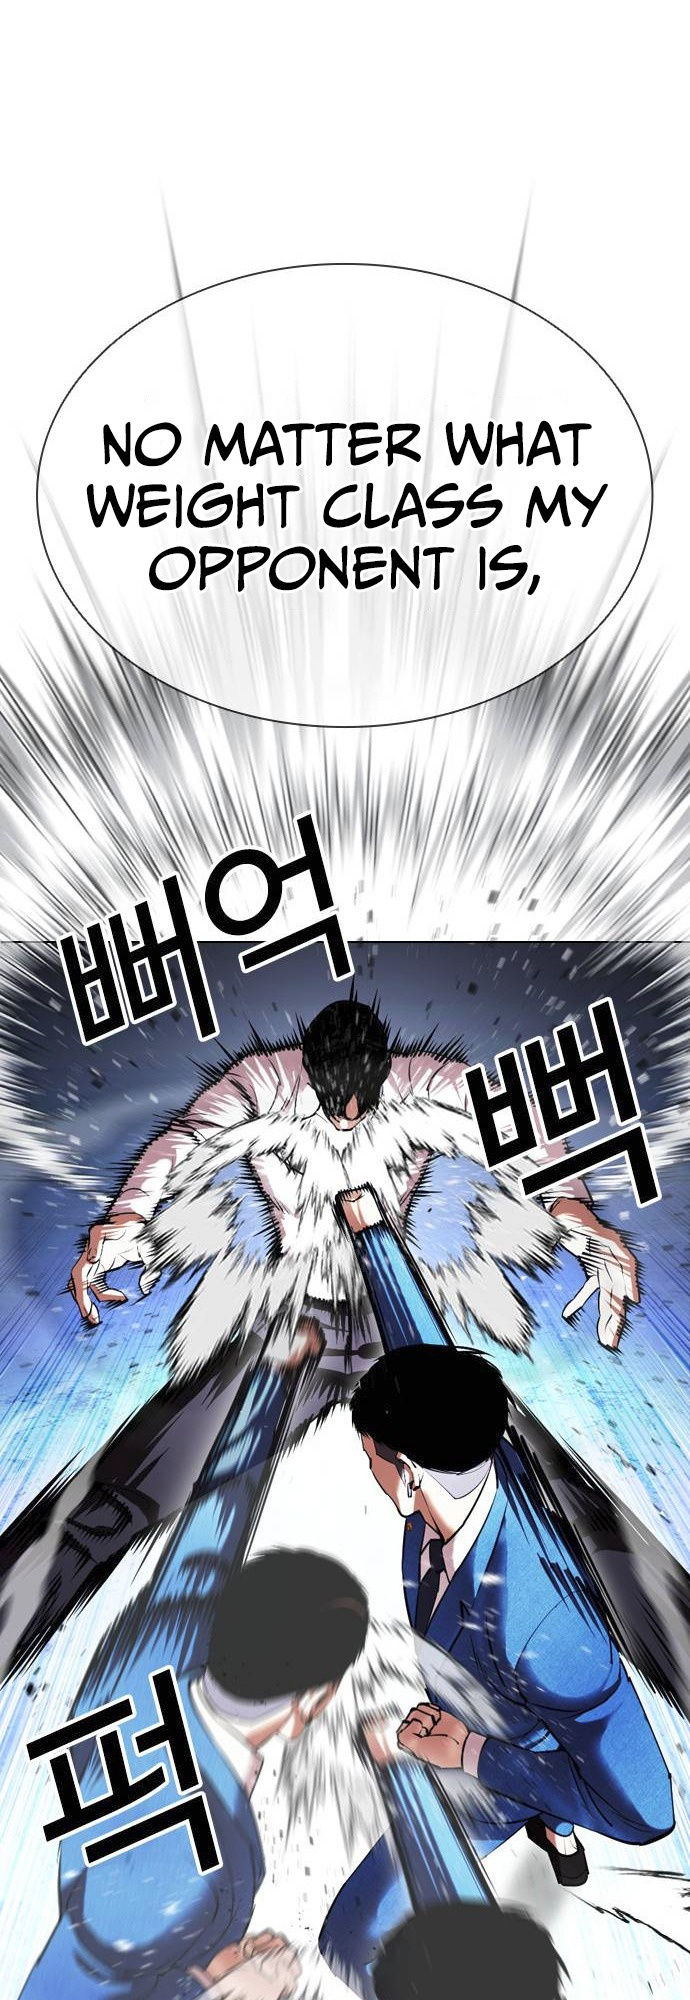 Lookism Chapter 415 image 053